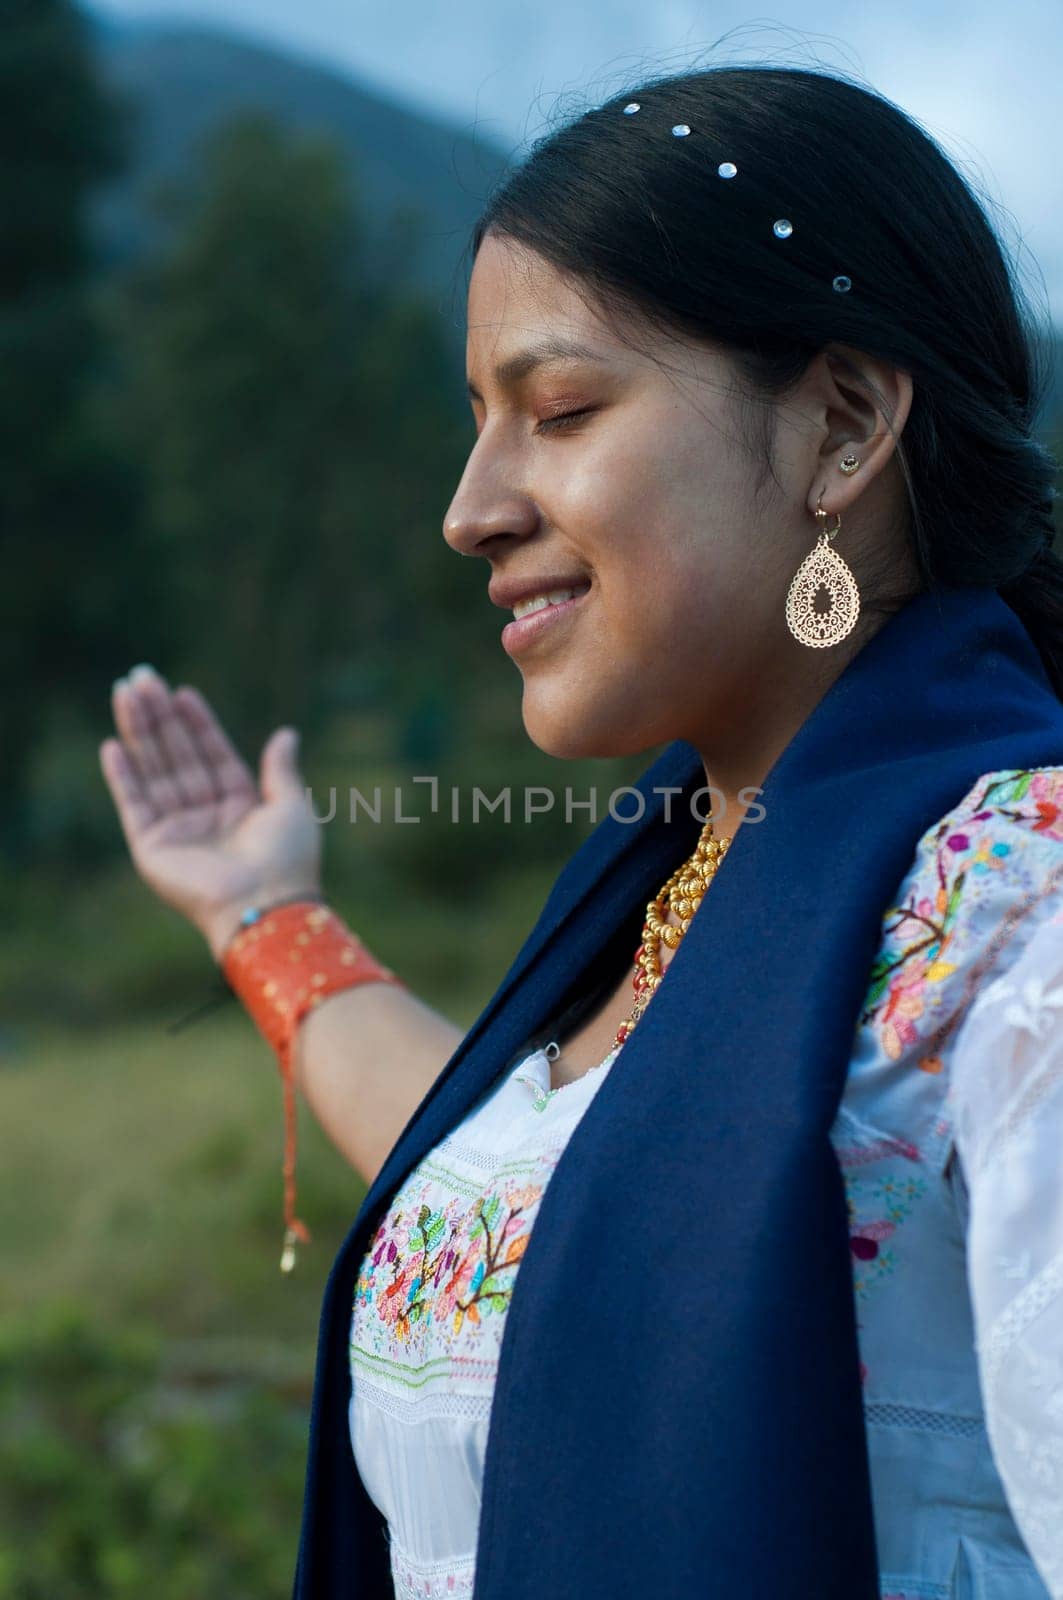 indigenous woman in a ritual in nature with her eyes closed and her arms crossed in traditional dress of her culture. High quality photo